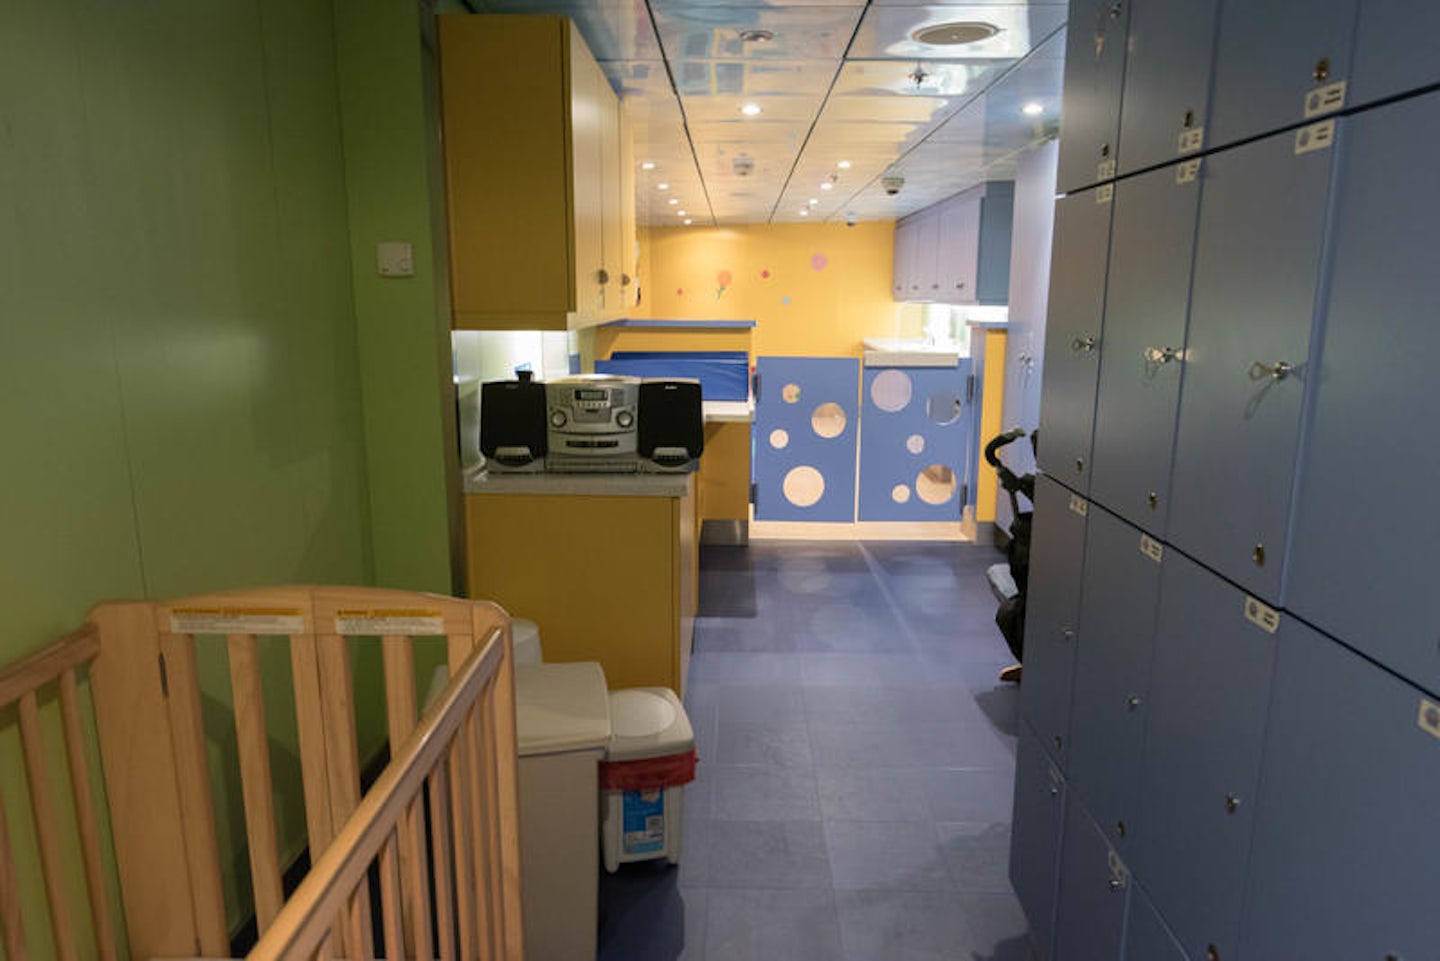 Royal Babies and Tots Nursery on Freedom of the Seas